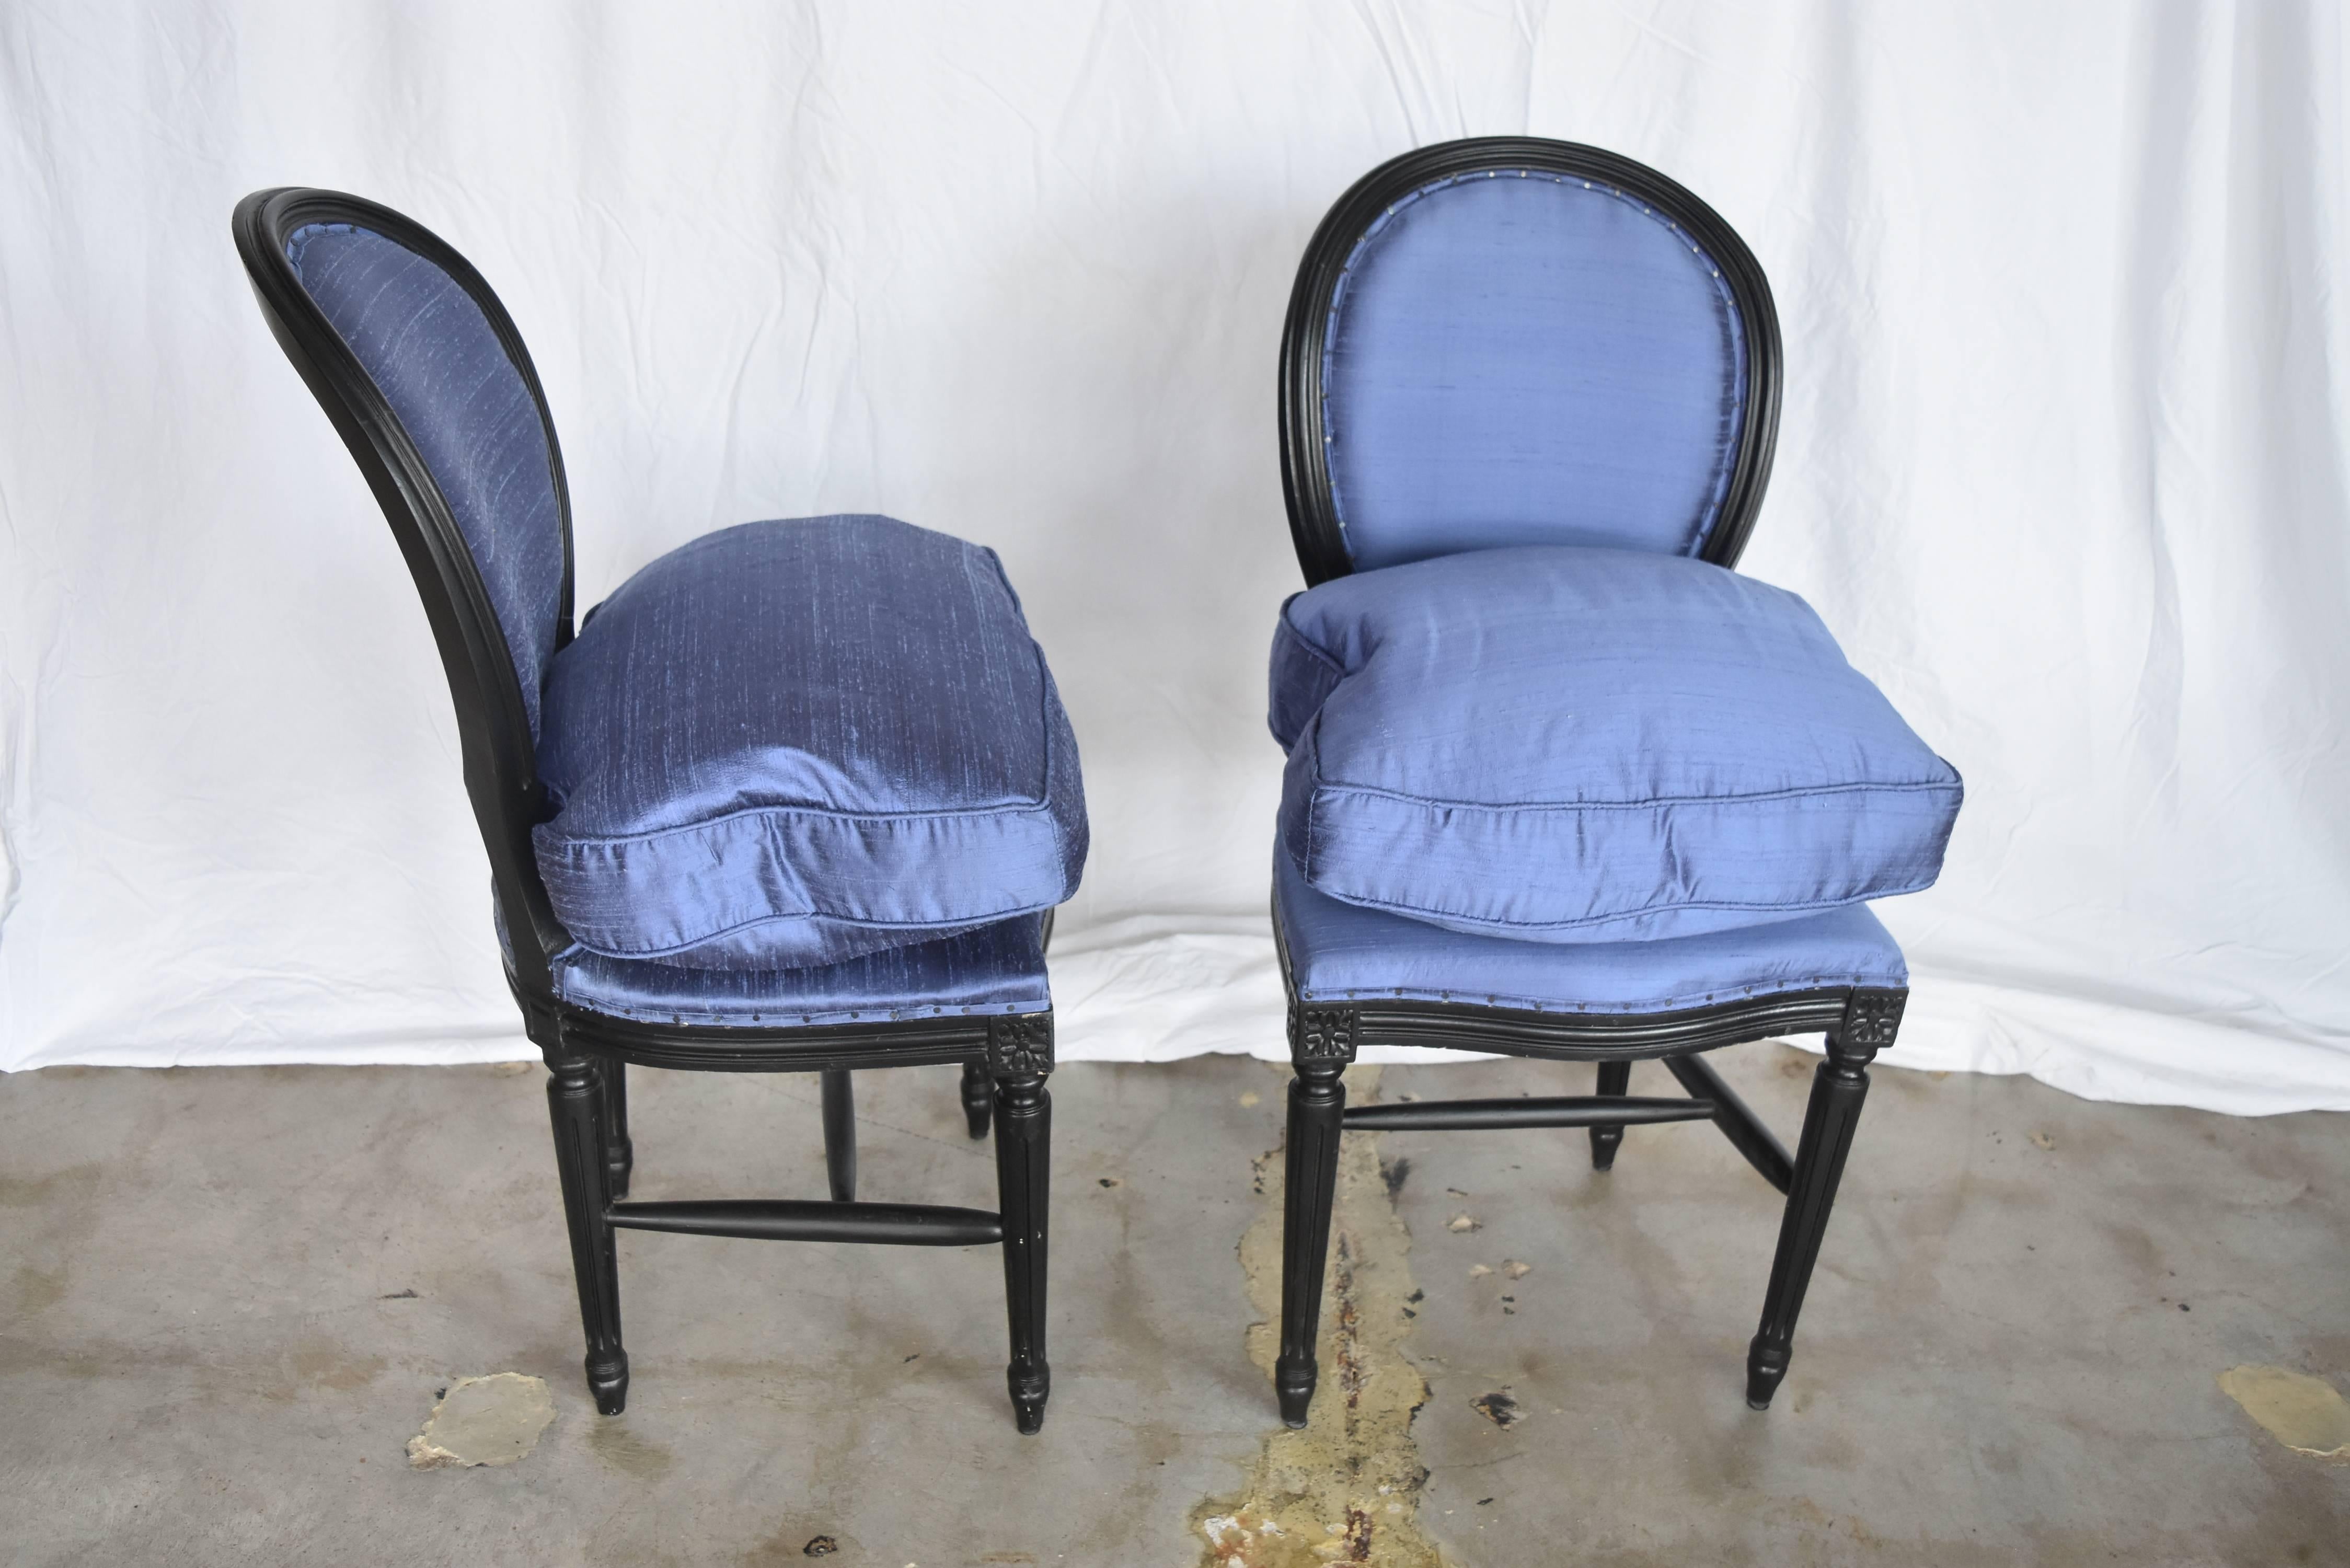 These Louis XVI chairs are from France. They have been painted black and upholstered in silk with down cushions made to give more comfort and height.
Seat height without cushion is 18